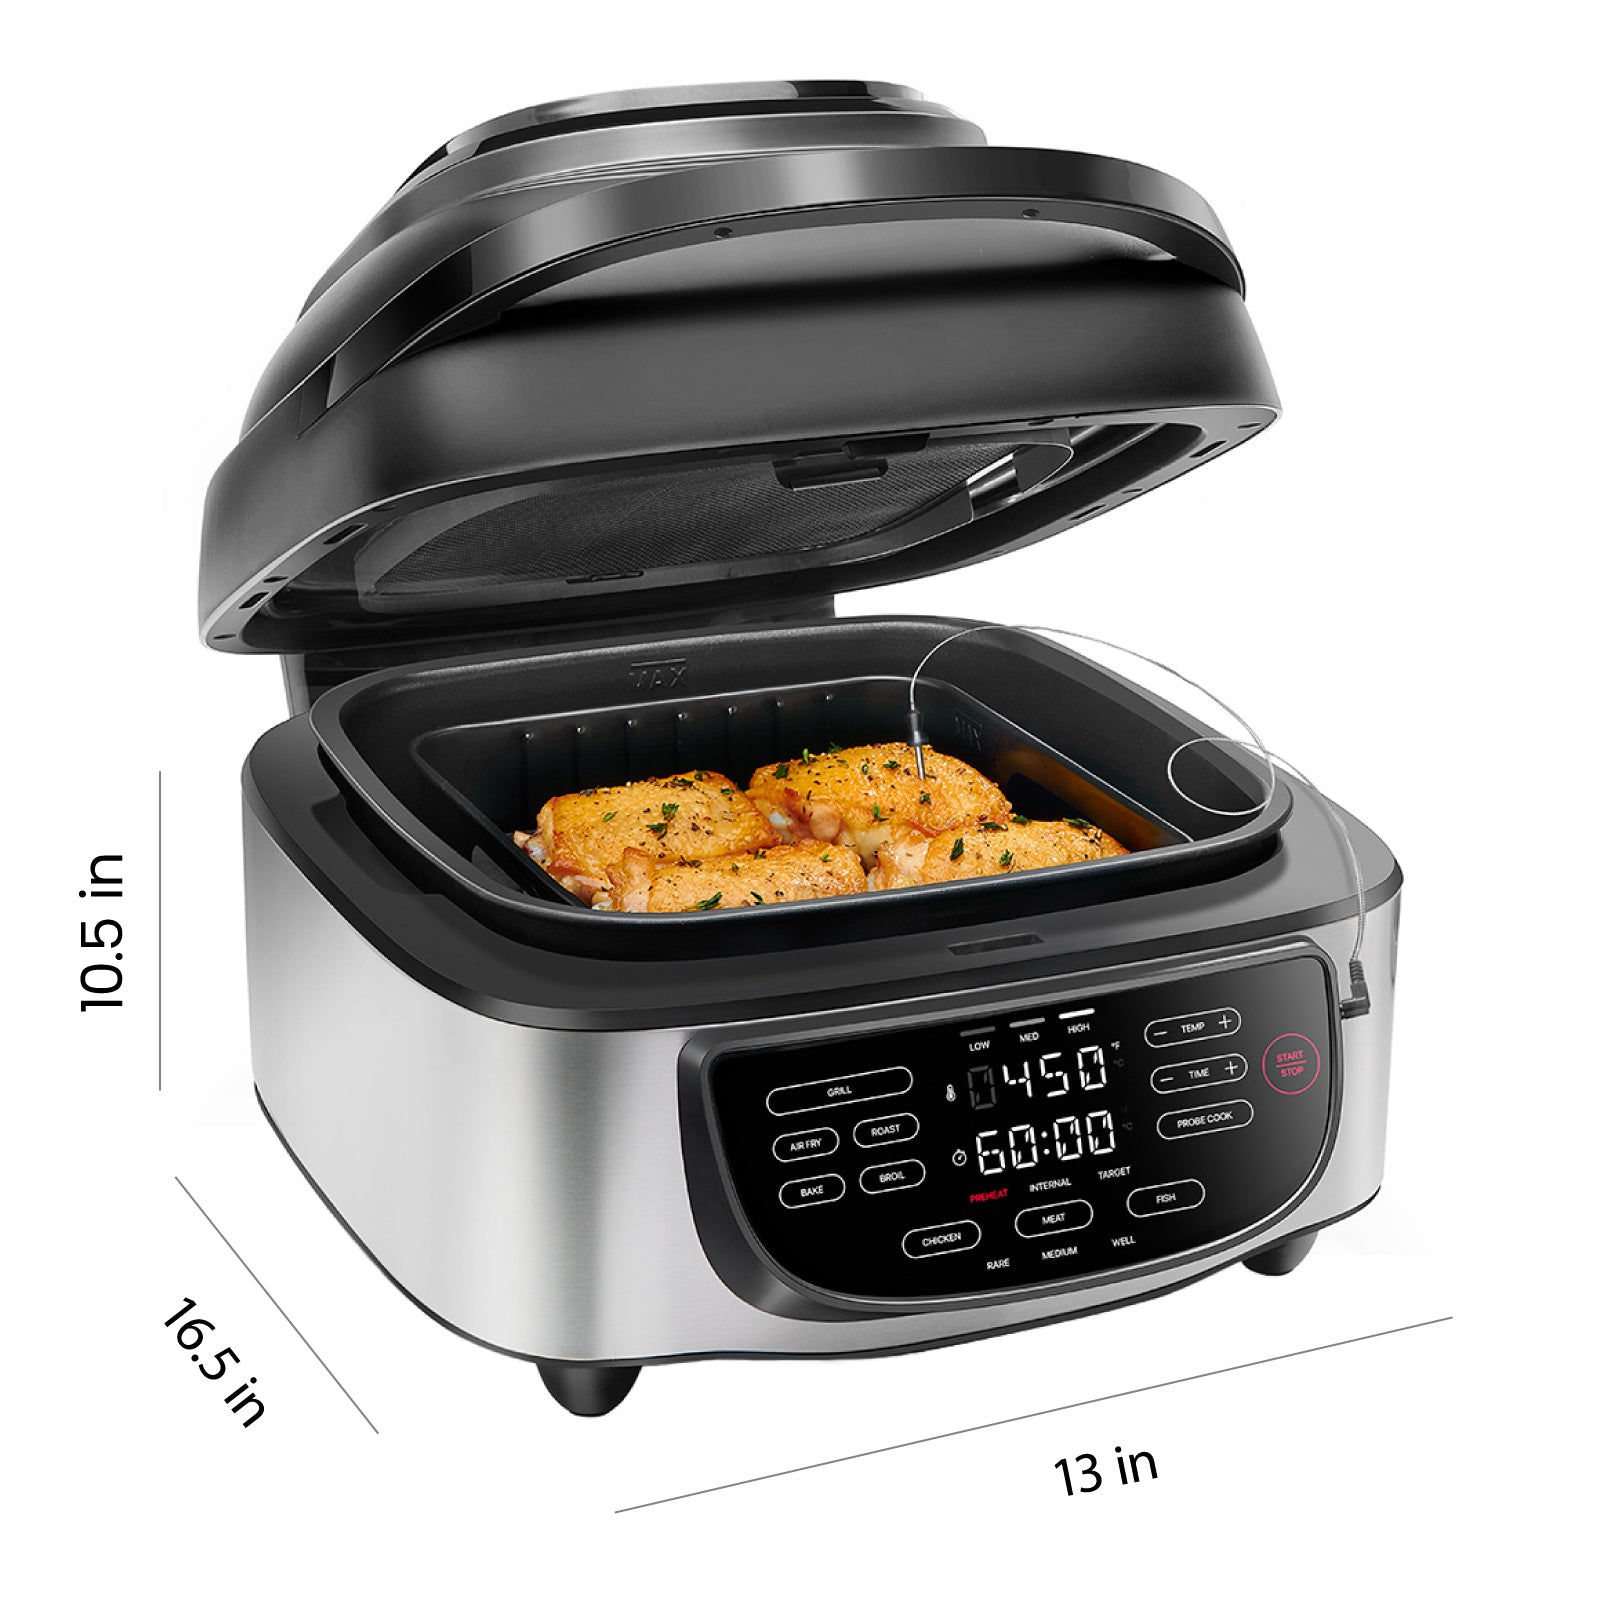 Chefman Black 8 Quart Air Fryer with Cooking Thermometer, 8 Presets, Nonstick, Easy-View Window